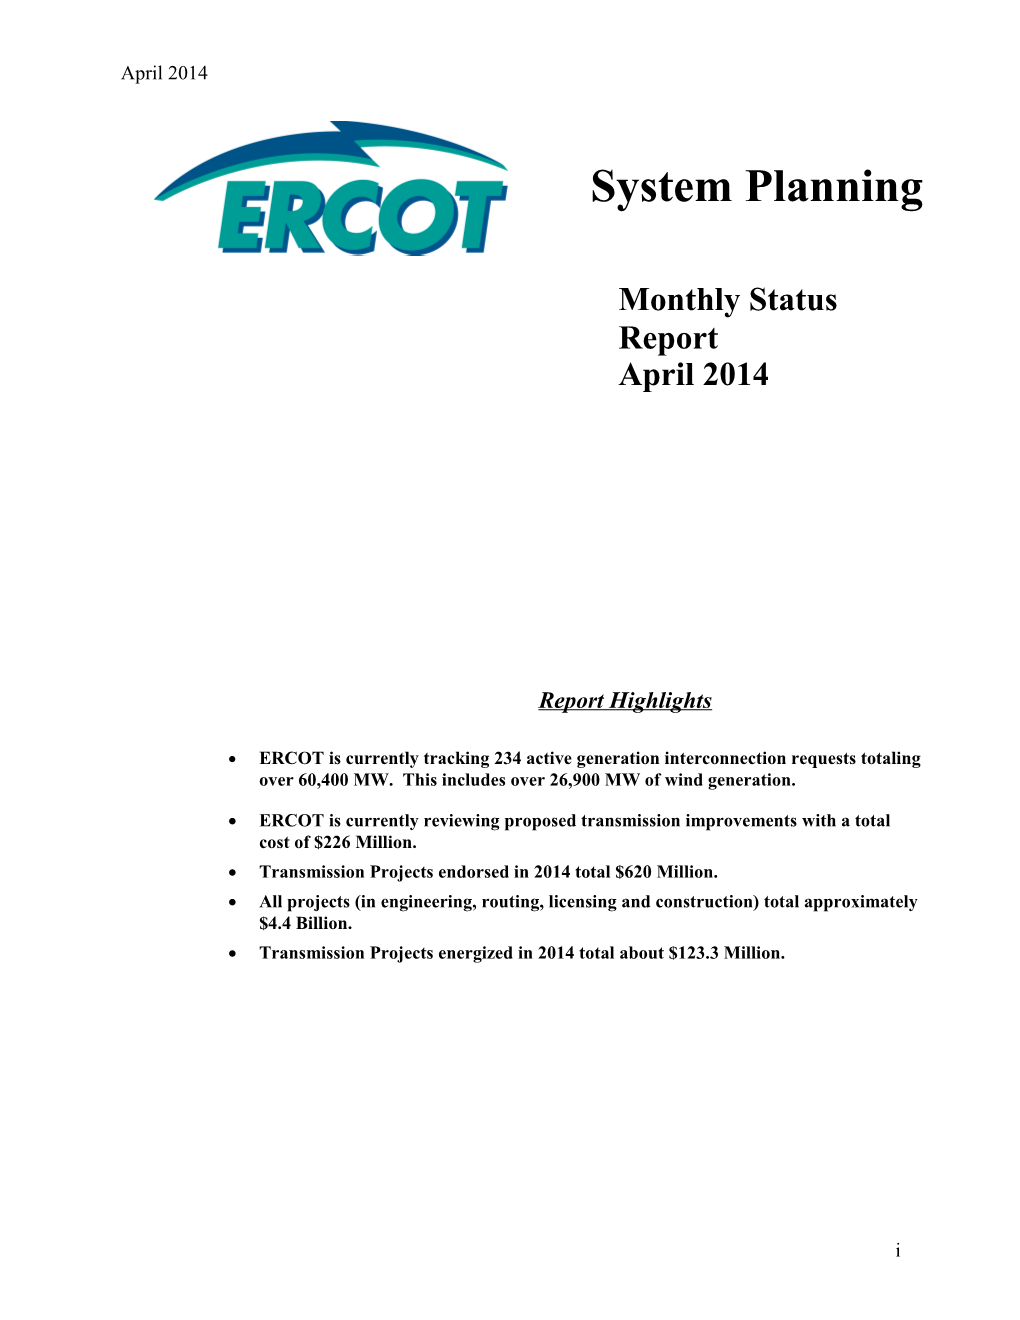 ERCOT Is Currently Reviewing Proposed Transmission Improvements with a Total Cost of $226